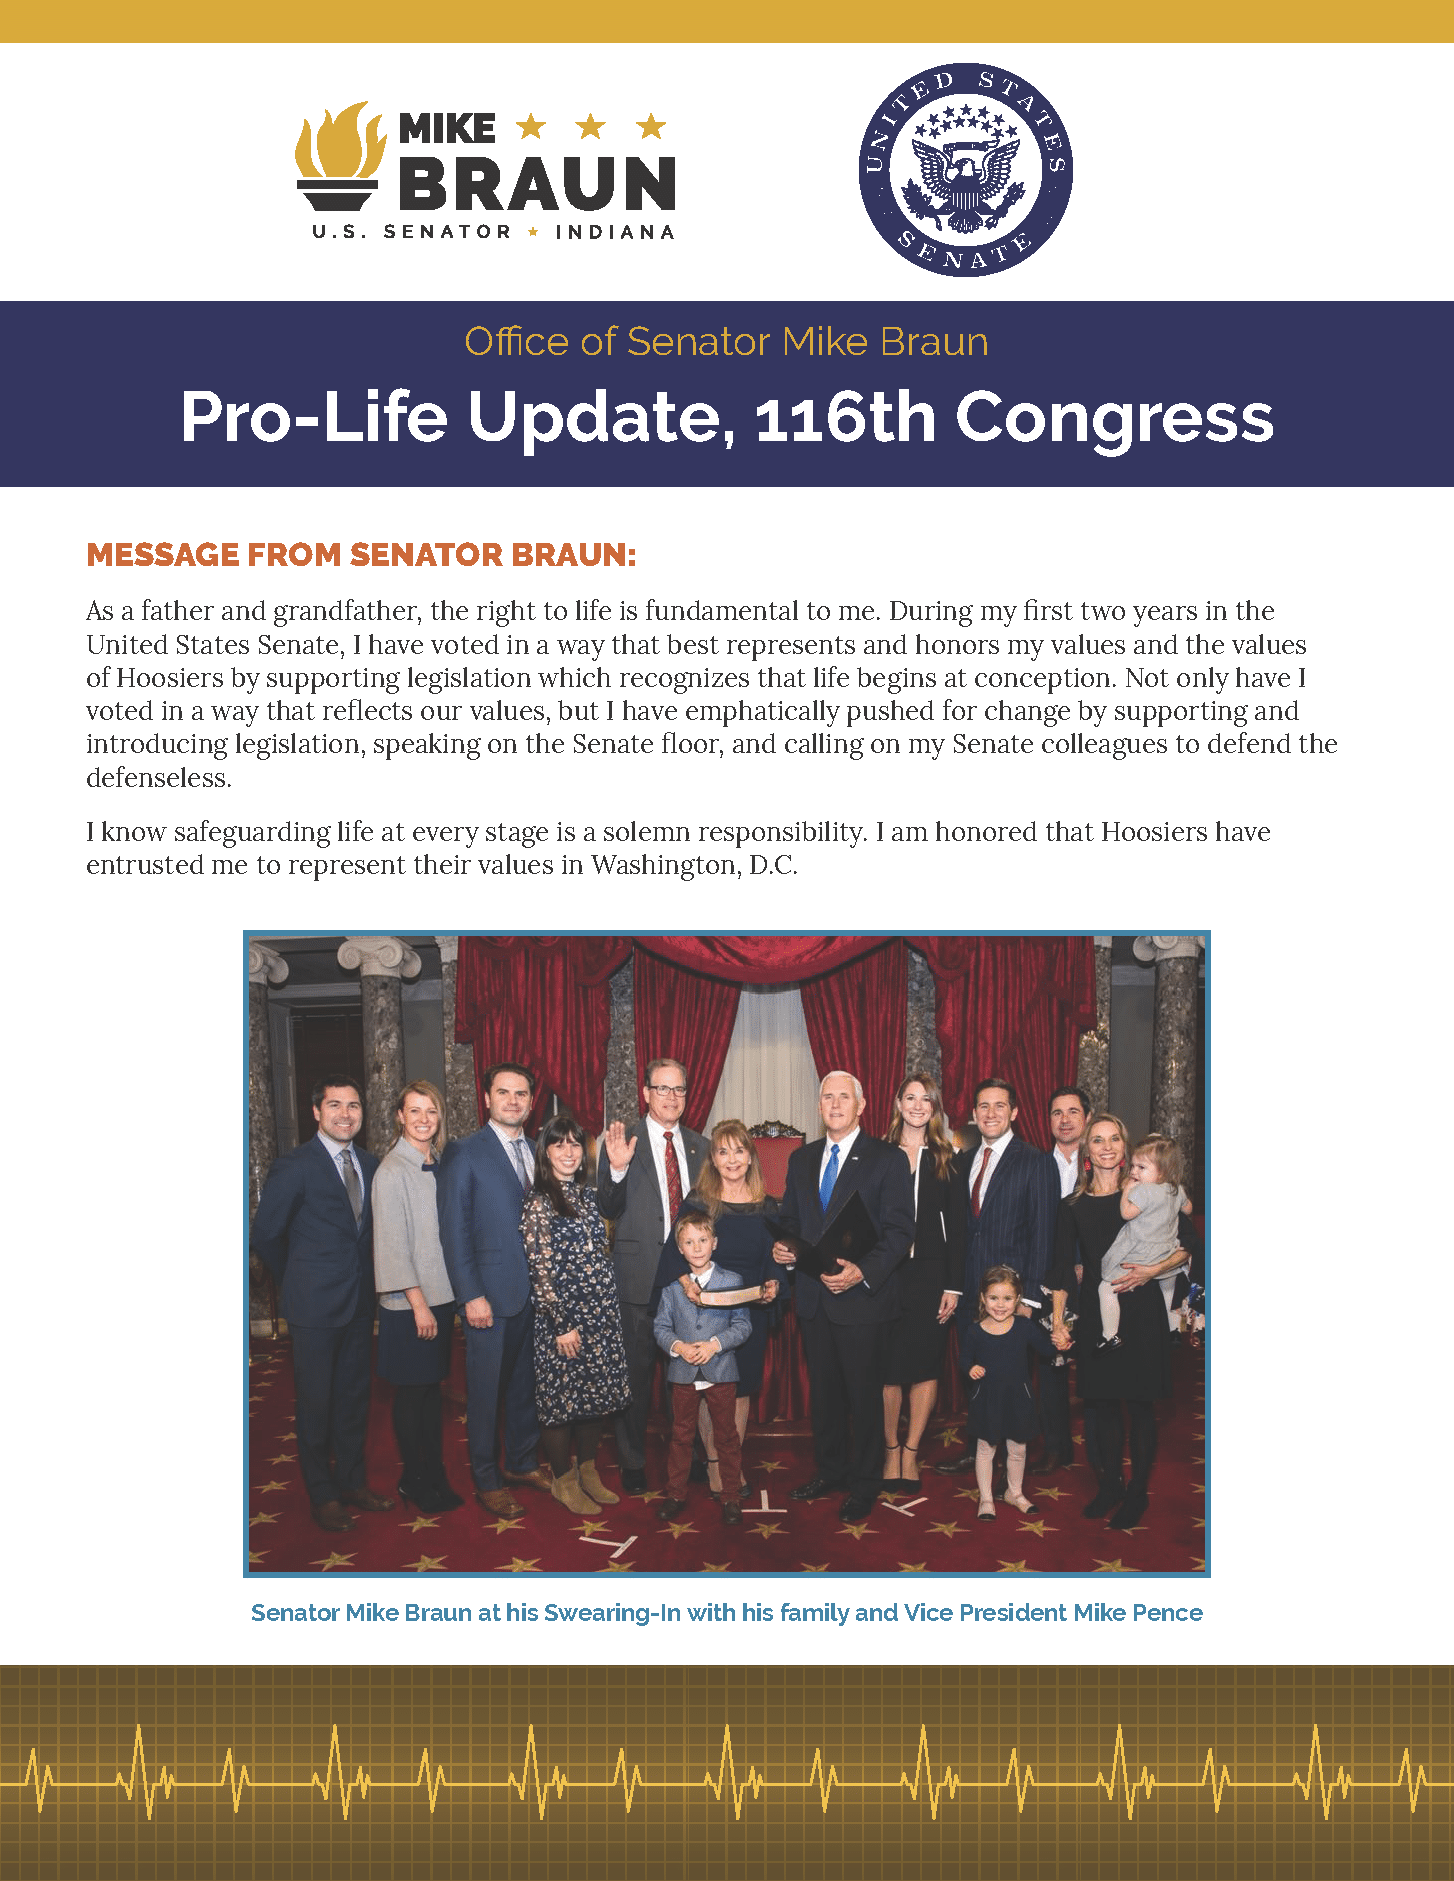 Sen. Mike Braun issues pro-life update for the 116th Congress